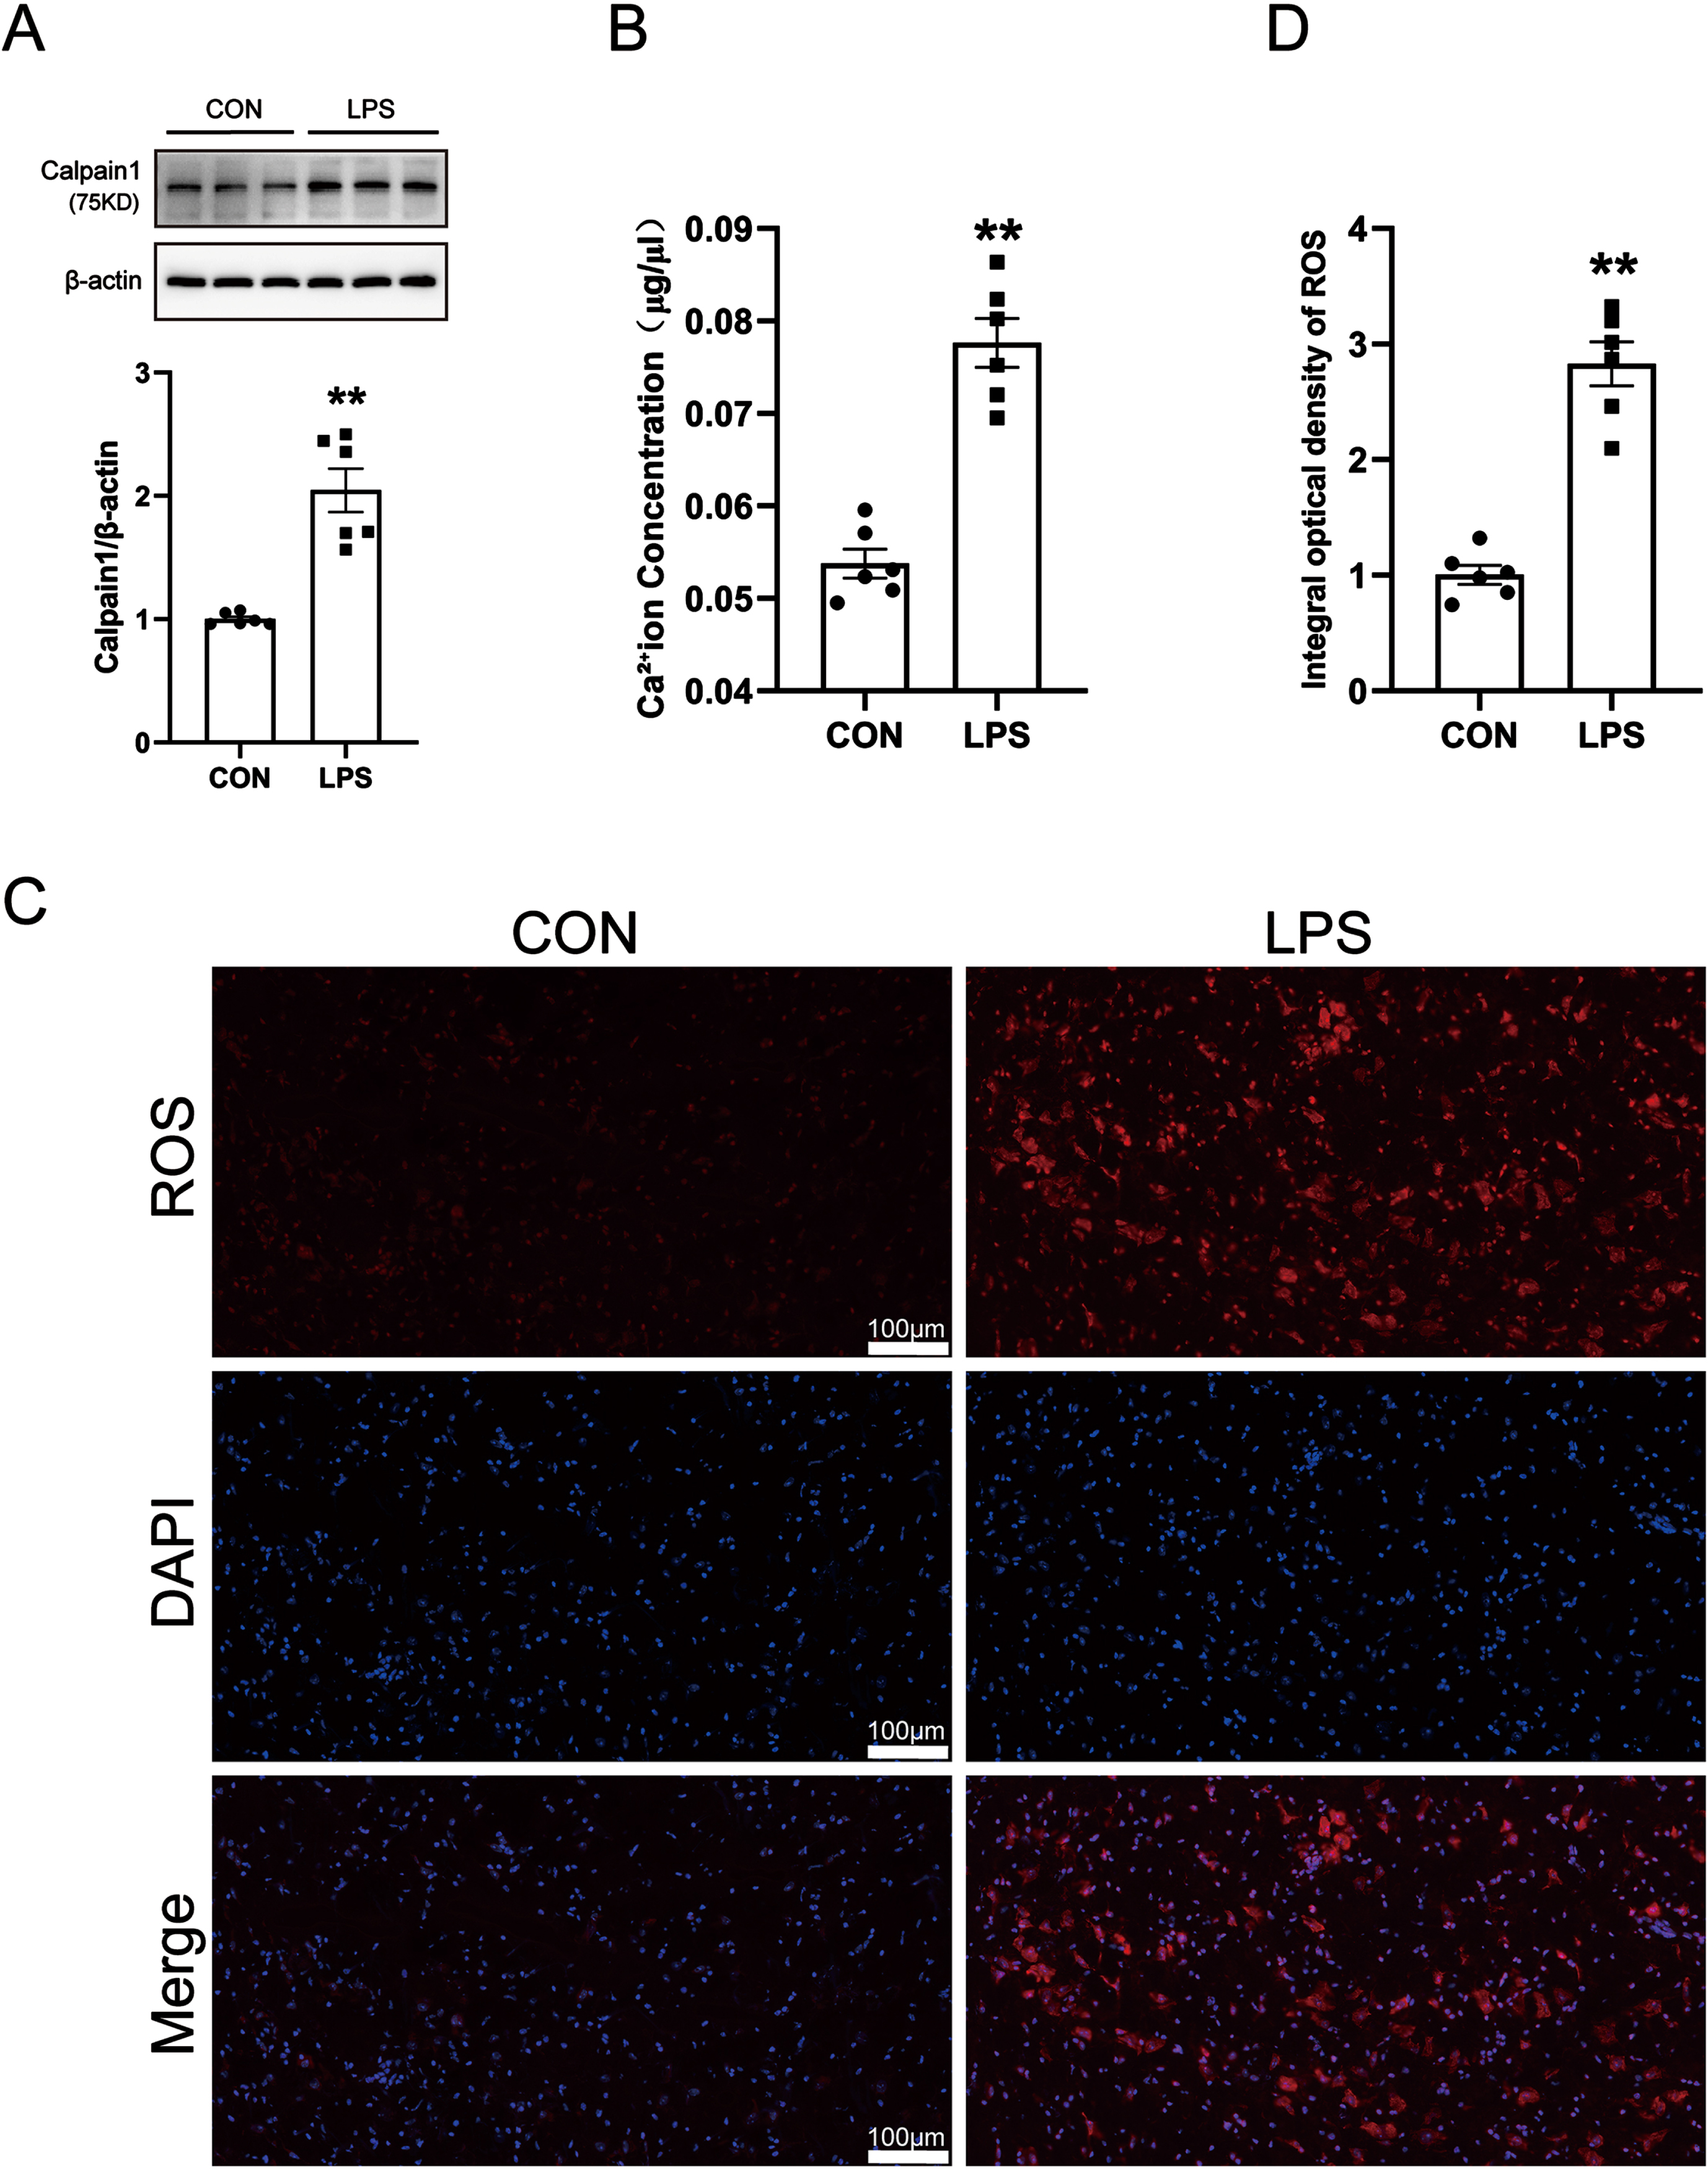 Changes of calcium ions, calpain 1 and ROS in LPS-induced PD mice model. A) Calcium Colorimetric Assay Kit for calcium level. B) Western blot for calpain 1 protein level. C) ROS-Immunofluorescence images. The bar is 100μm. D) The mean density of ROS production in the SN. Data are expressed as mean±SEM (n = 6). **p < 0.01 vs. the control group.